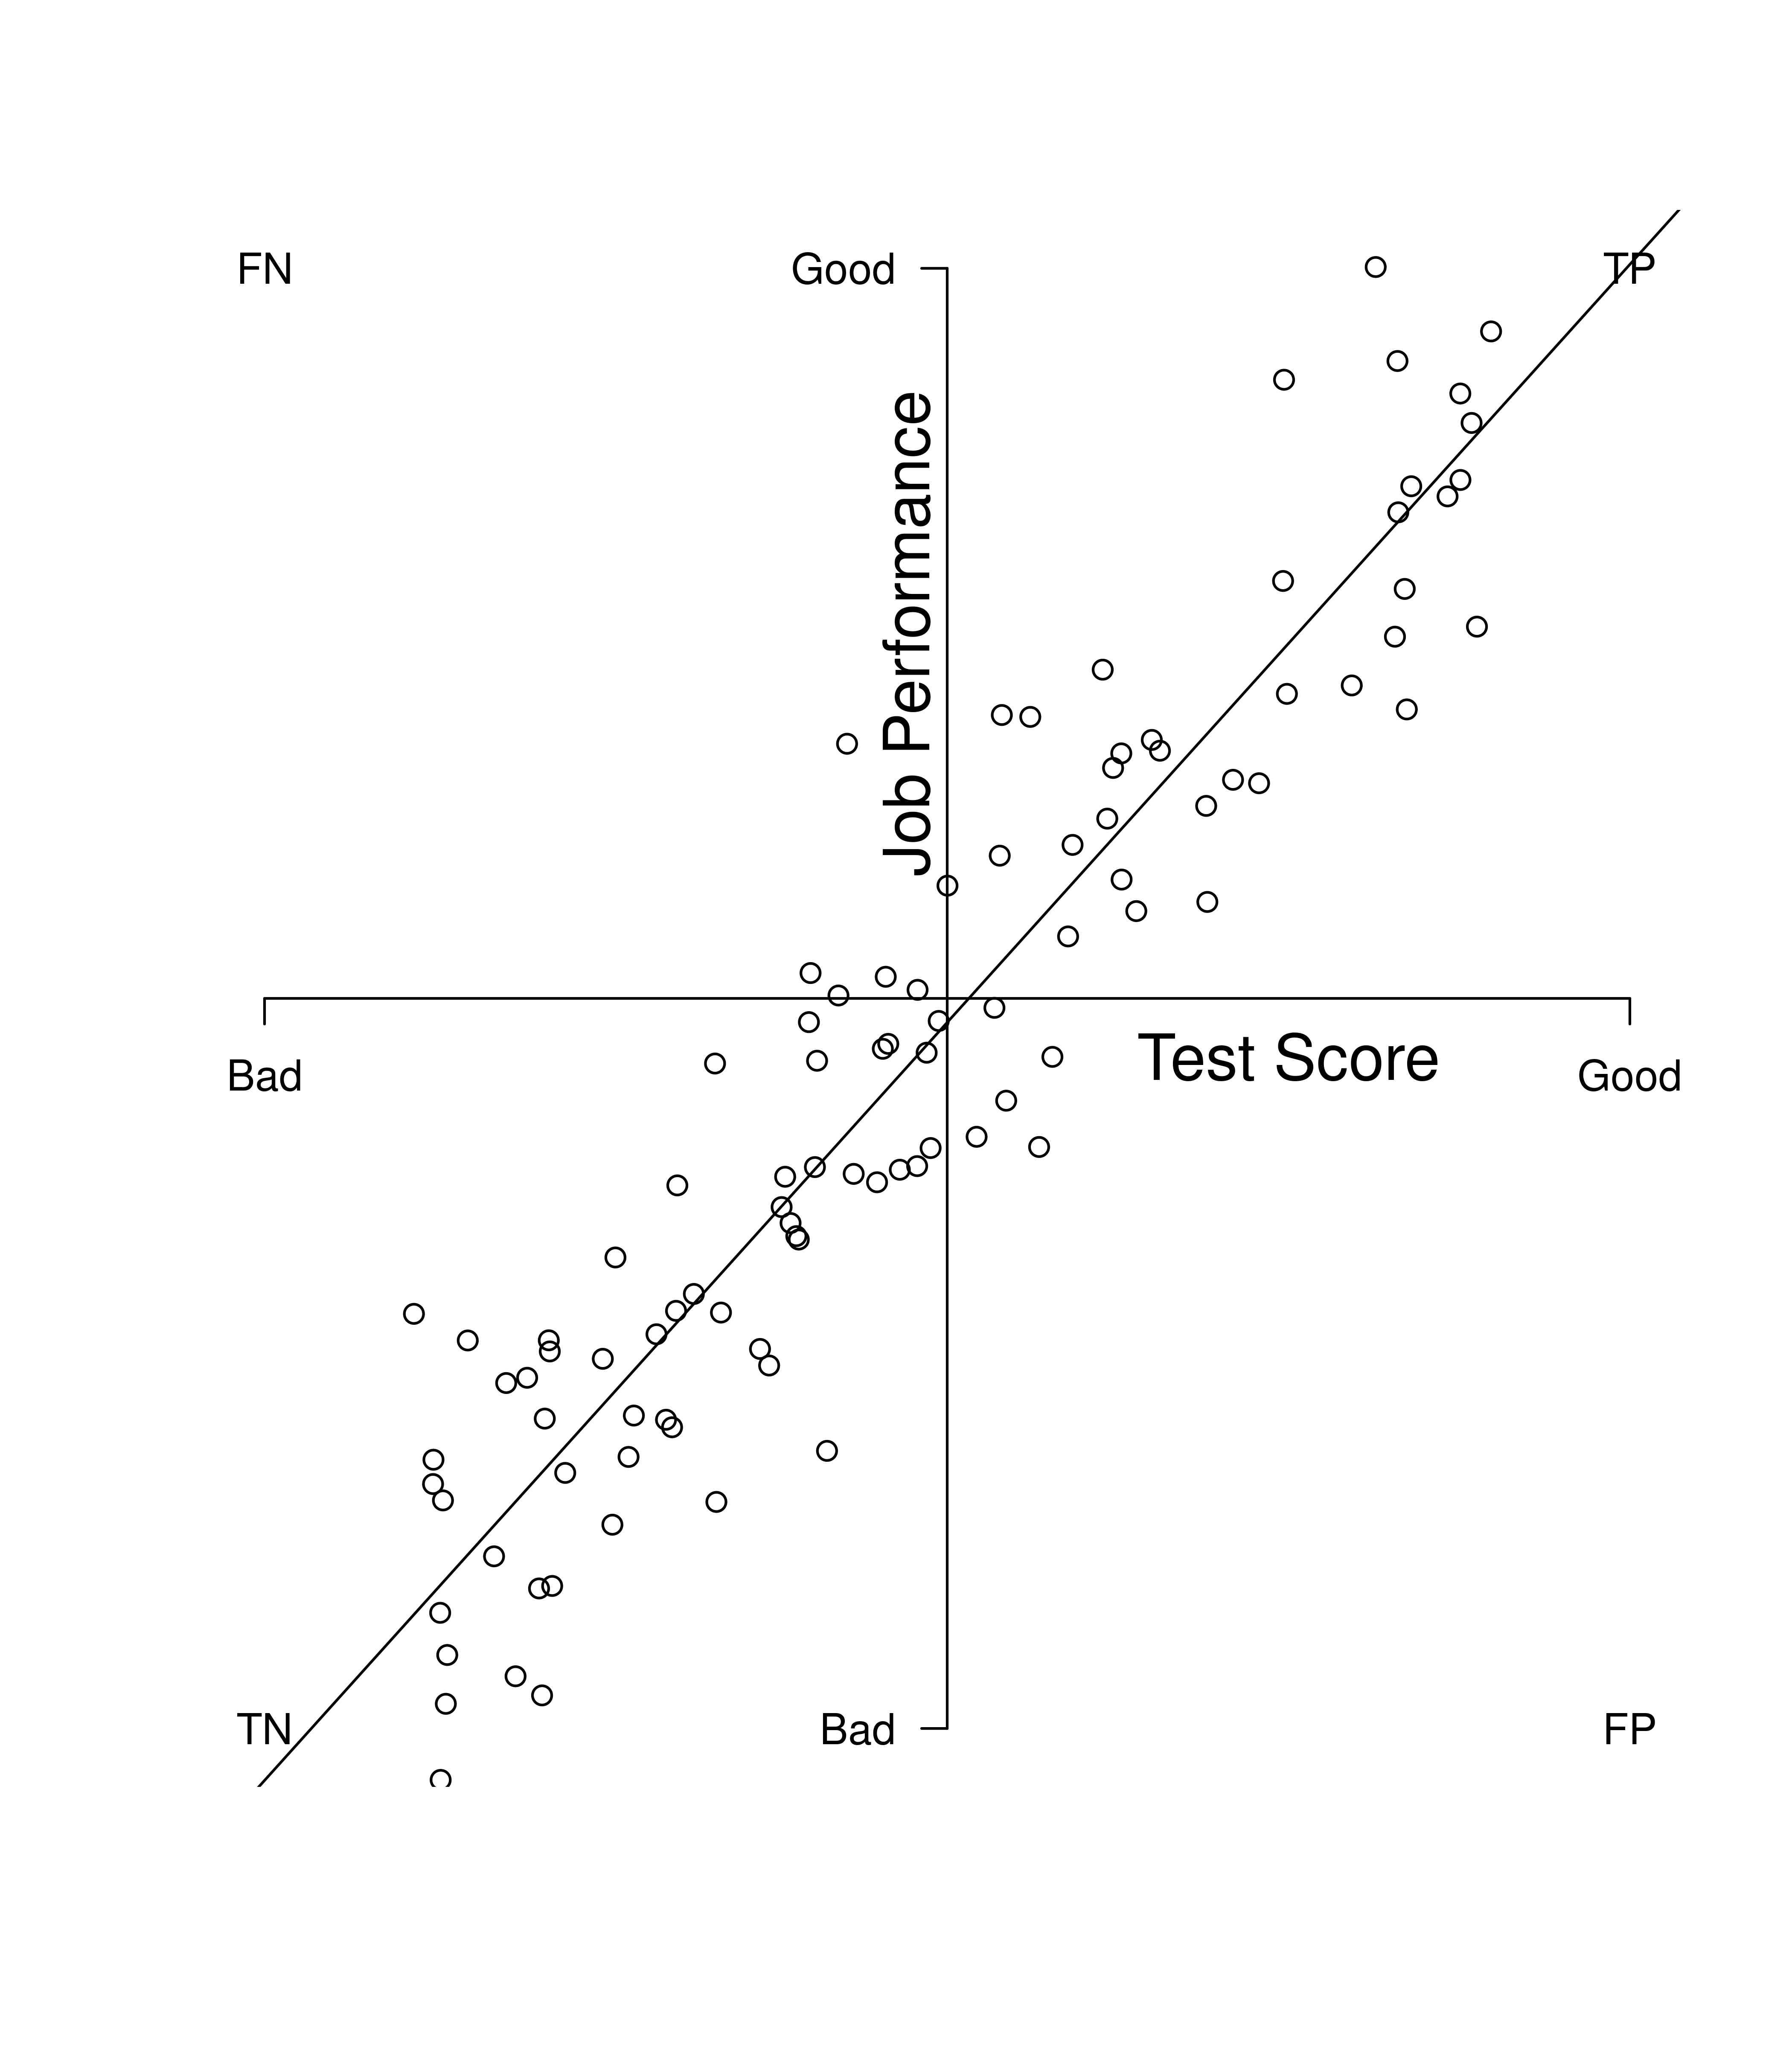 Example of a Strong Predictor. TP = true positive; TN = true negative; FP = false positive; FN = false negative.